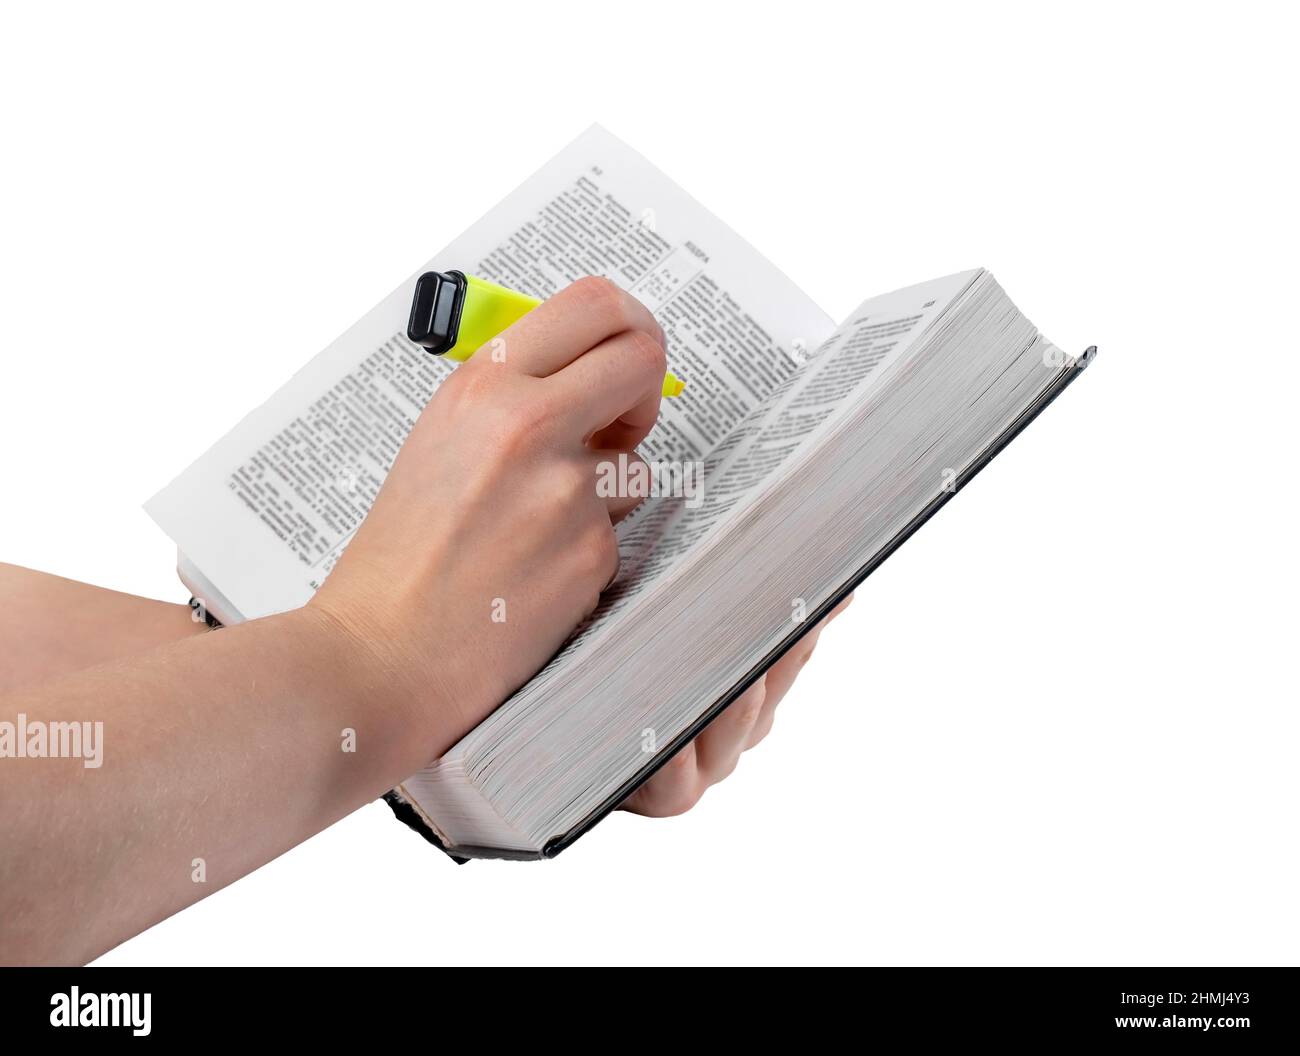 https://c8.alamy.com/comp/2HMJ4Y3/book-highlight-hand-marking-important-text-in-book-isolated-on-white-background-education-preparing-for-exams-concept-high-quality-photo-2HMJ4Y3.jpg